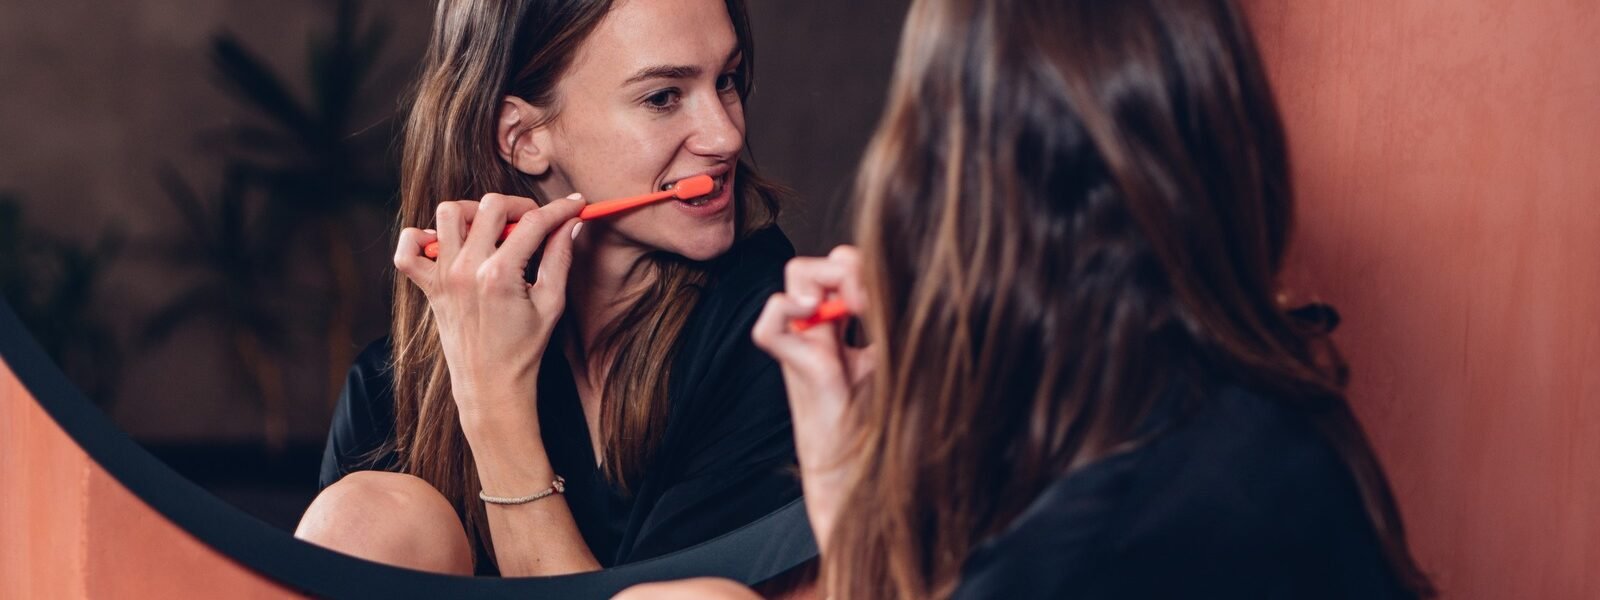 Brushing Your Teeth Before Sex Is More Dangerous Than You Think - Health Digest